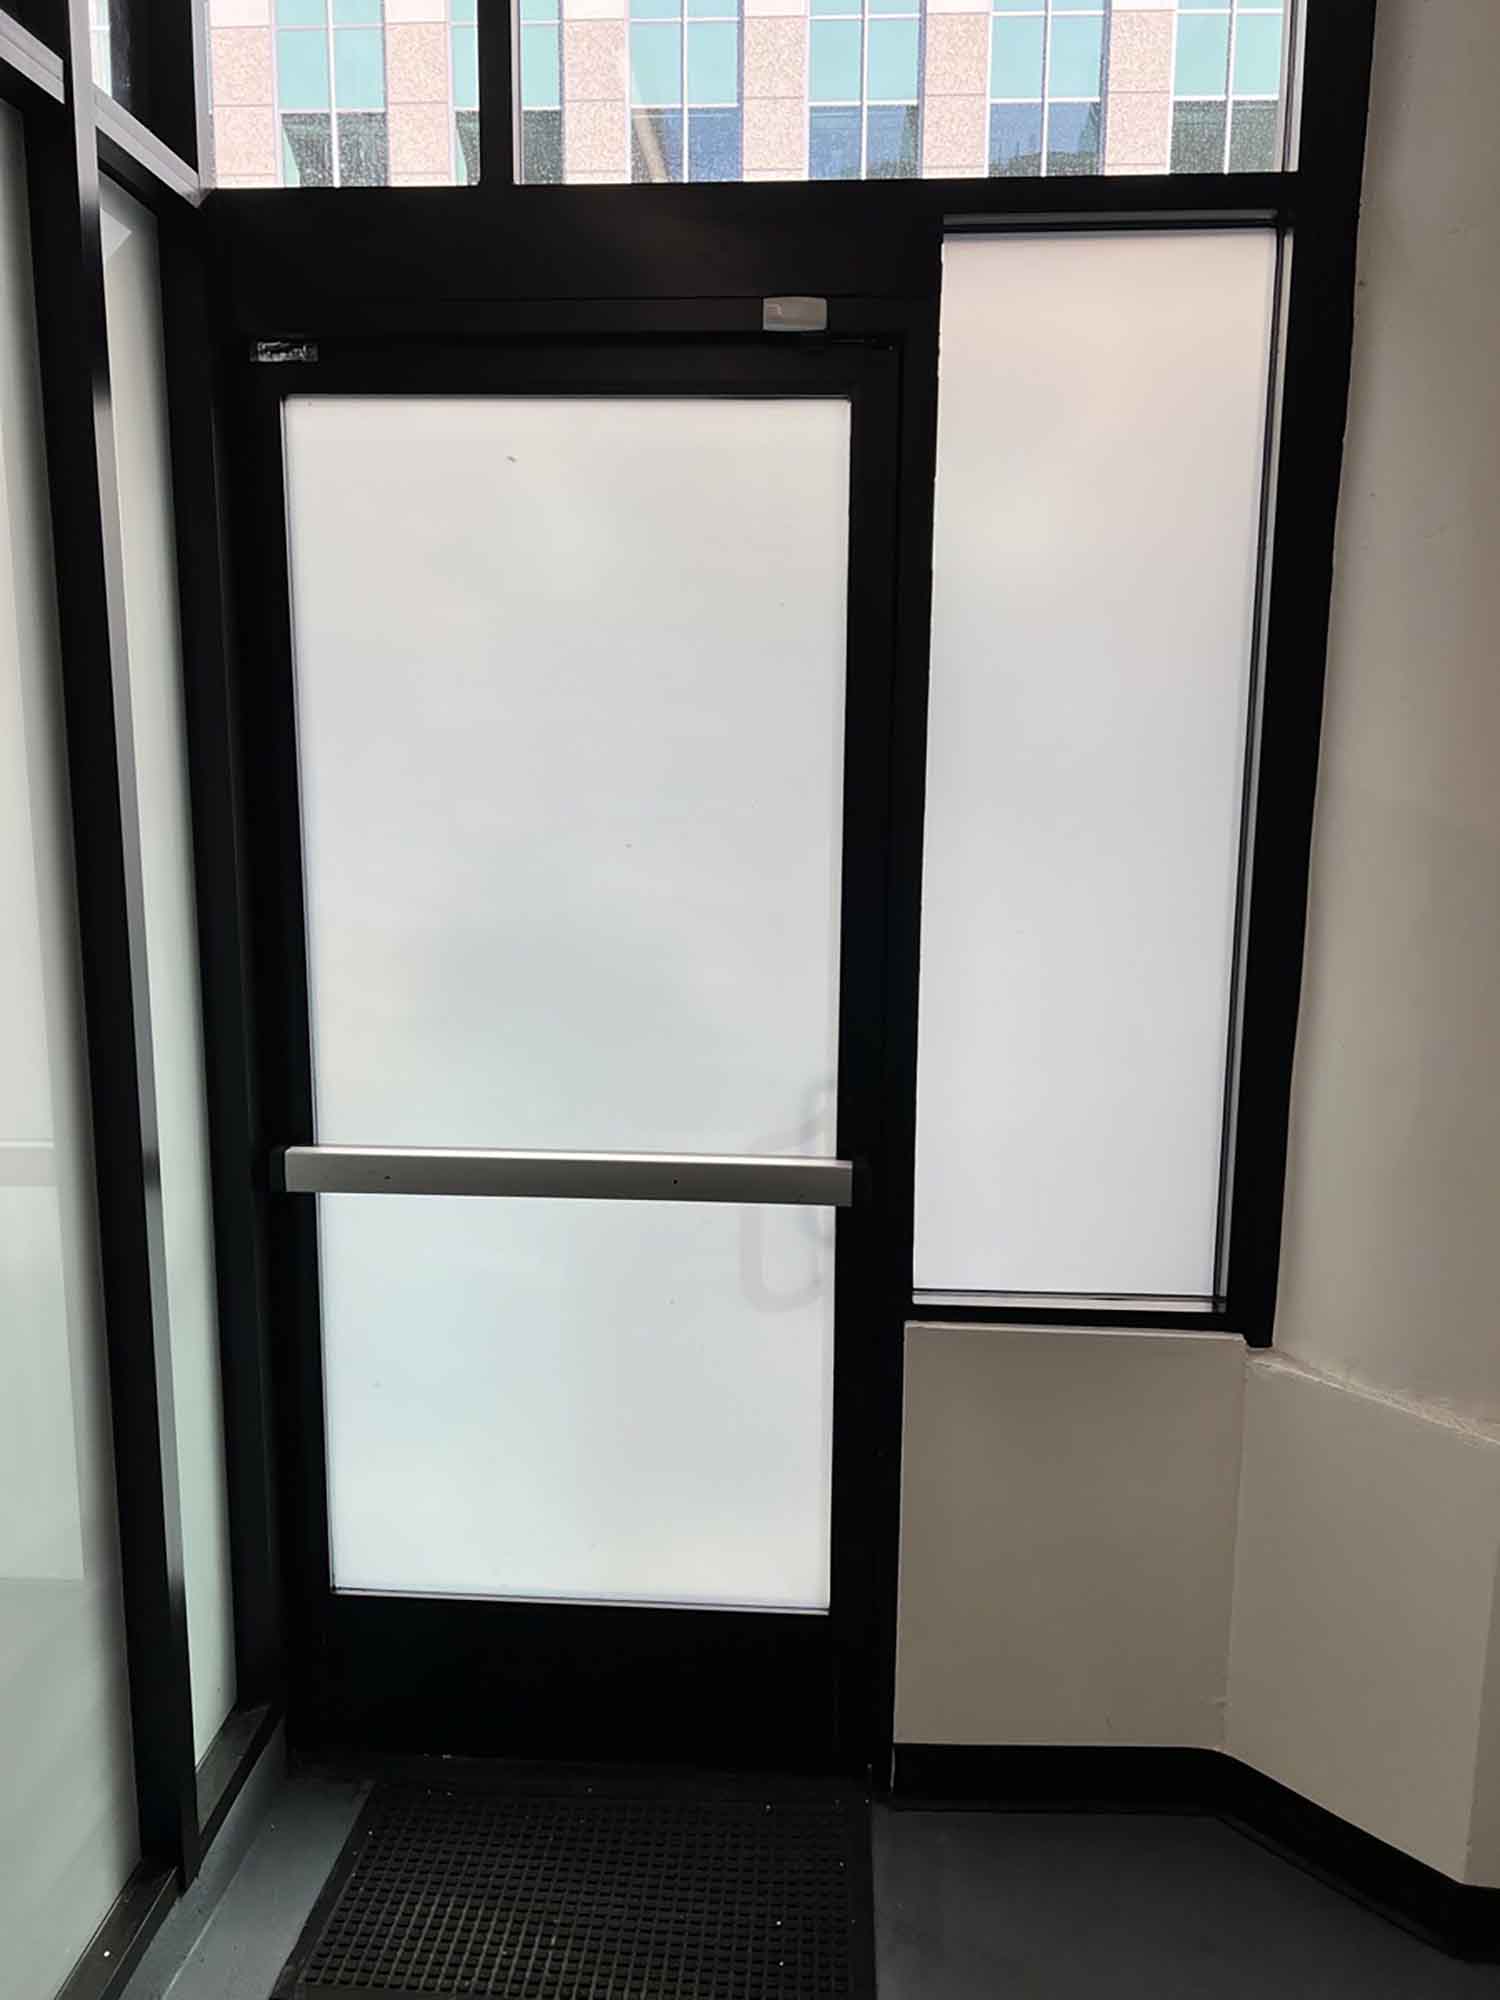 ClimatePro Installs Privacy Window Film for Offices in San Francisco, CA